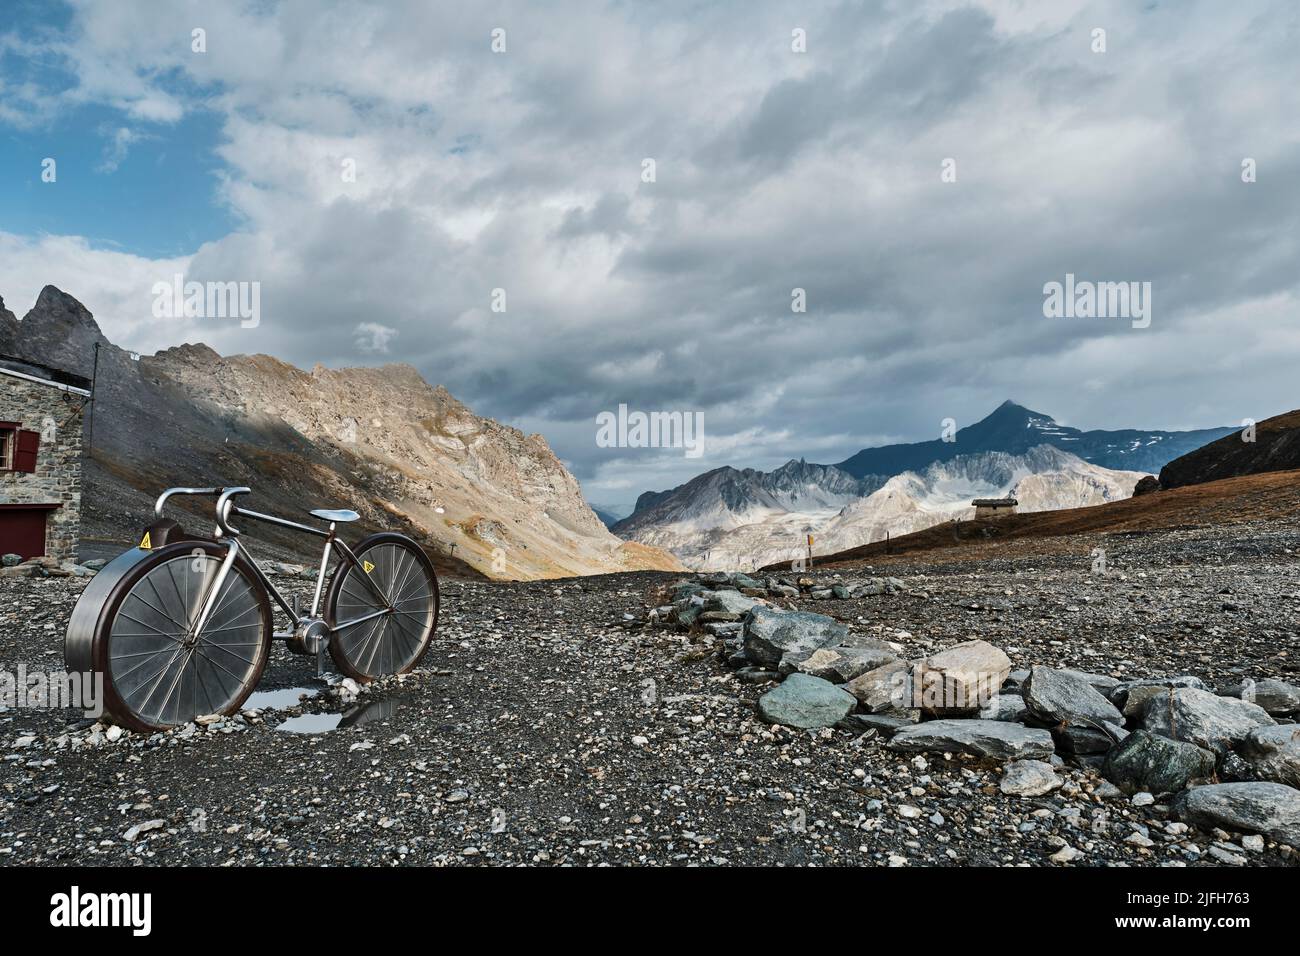 racing bicycle at Col de Liseran stage on the tour de france in the french alps Stock Photo